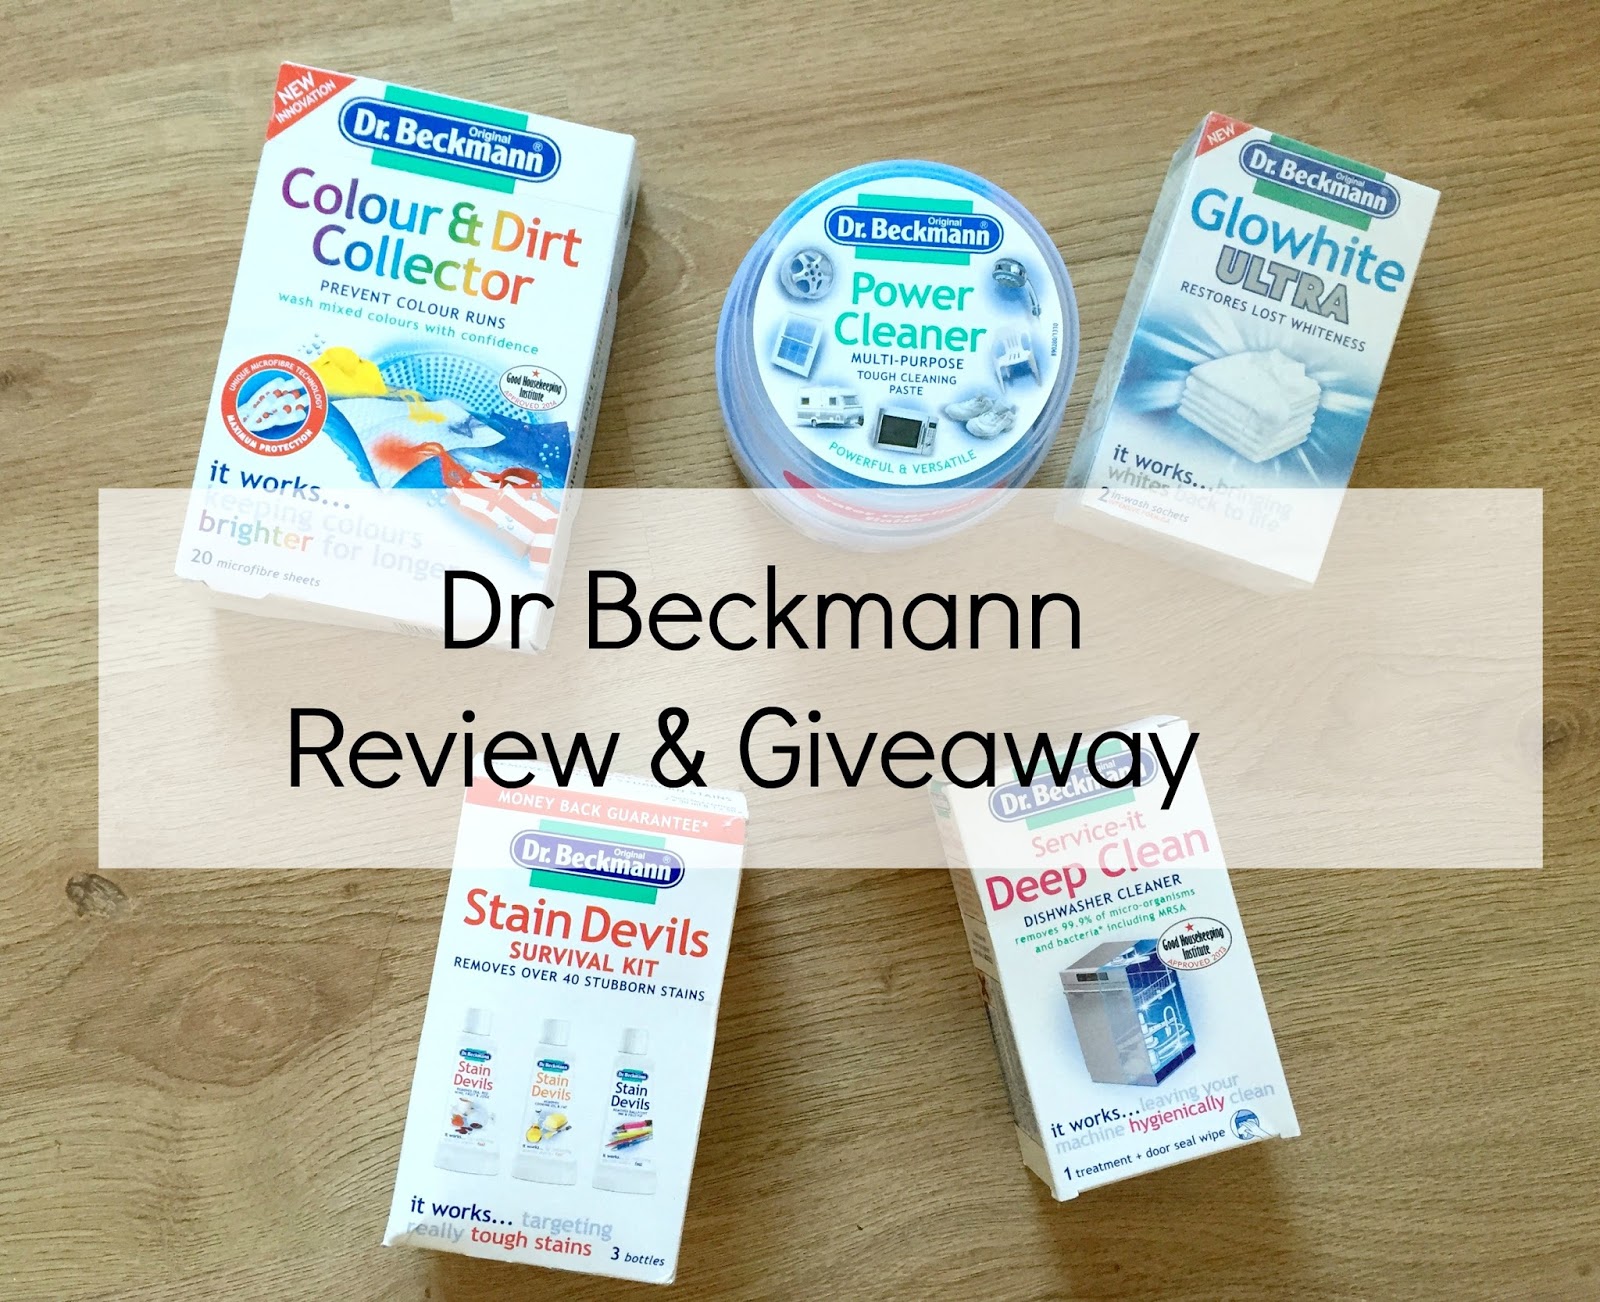 Dr. Beckmann Stain Remover In-Wash – removes tough stains